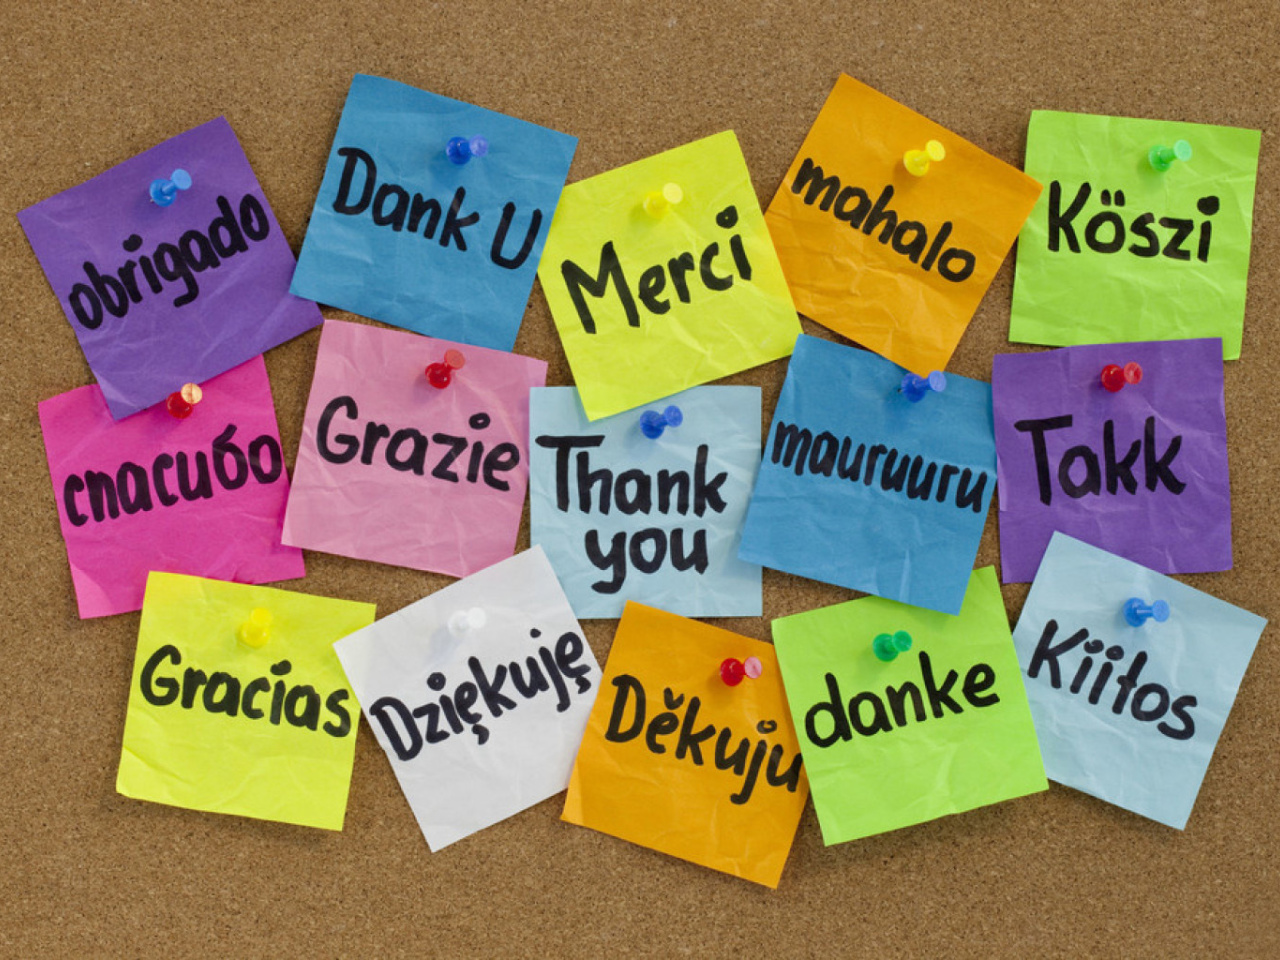 How To Say Thank You in Different Languages wallpaper 1280x960